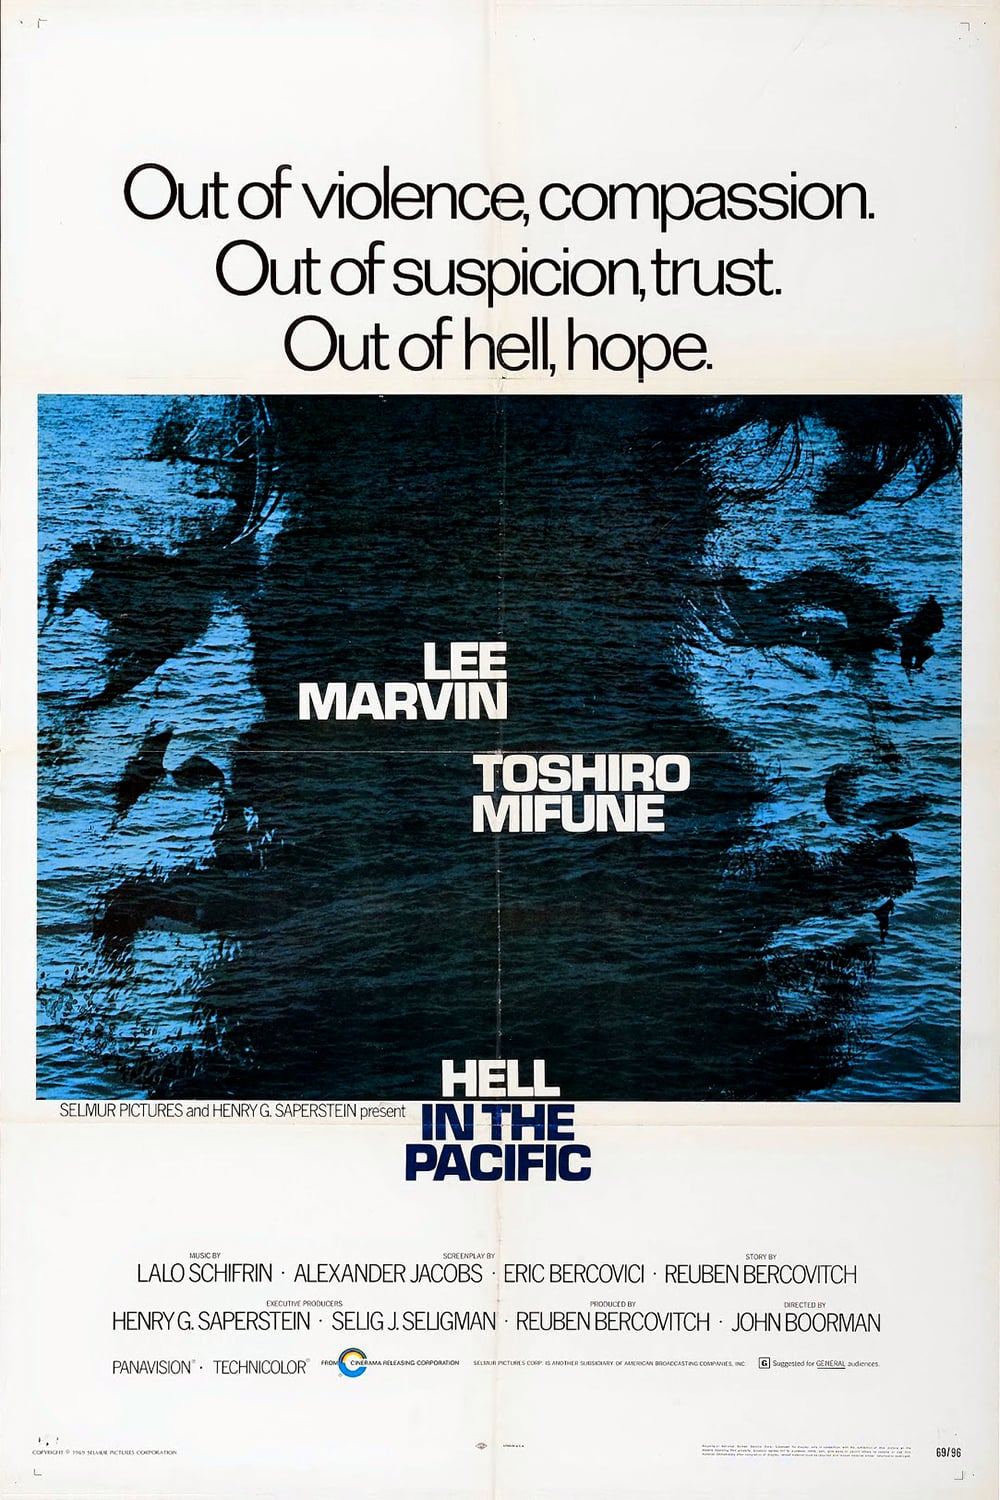 Poster for the movie "Hell in the Pacific"